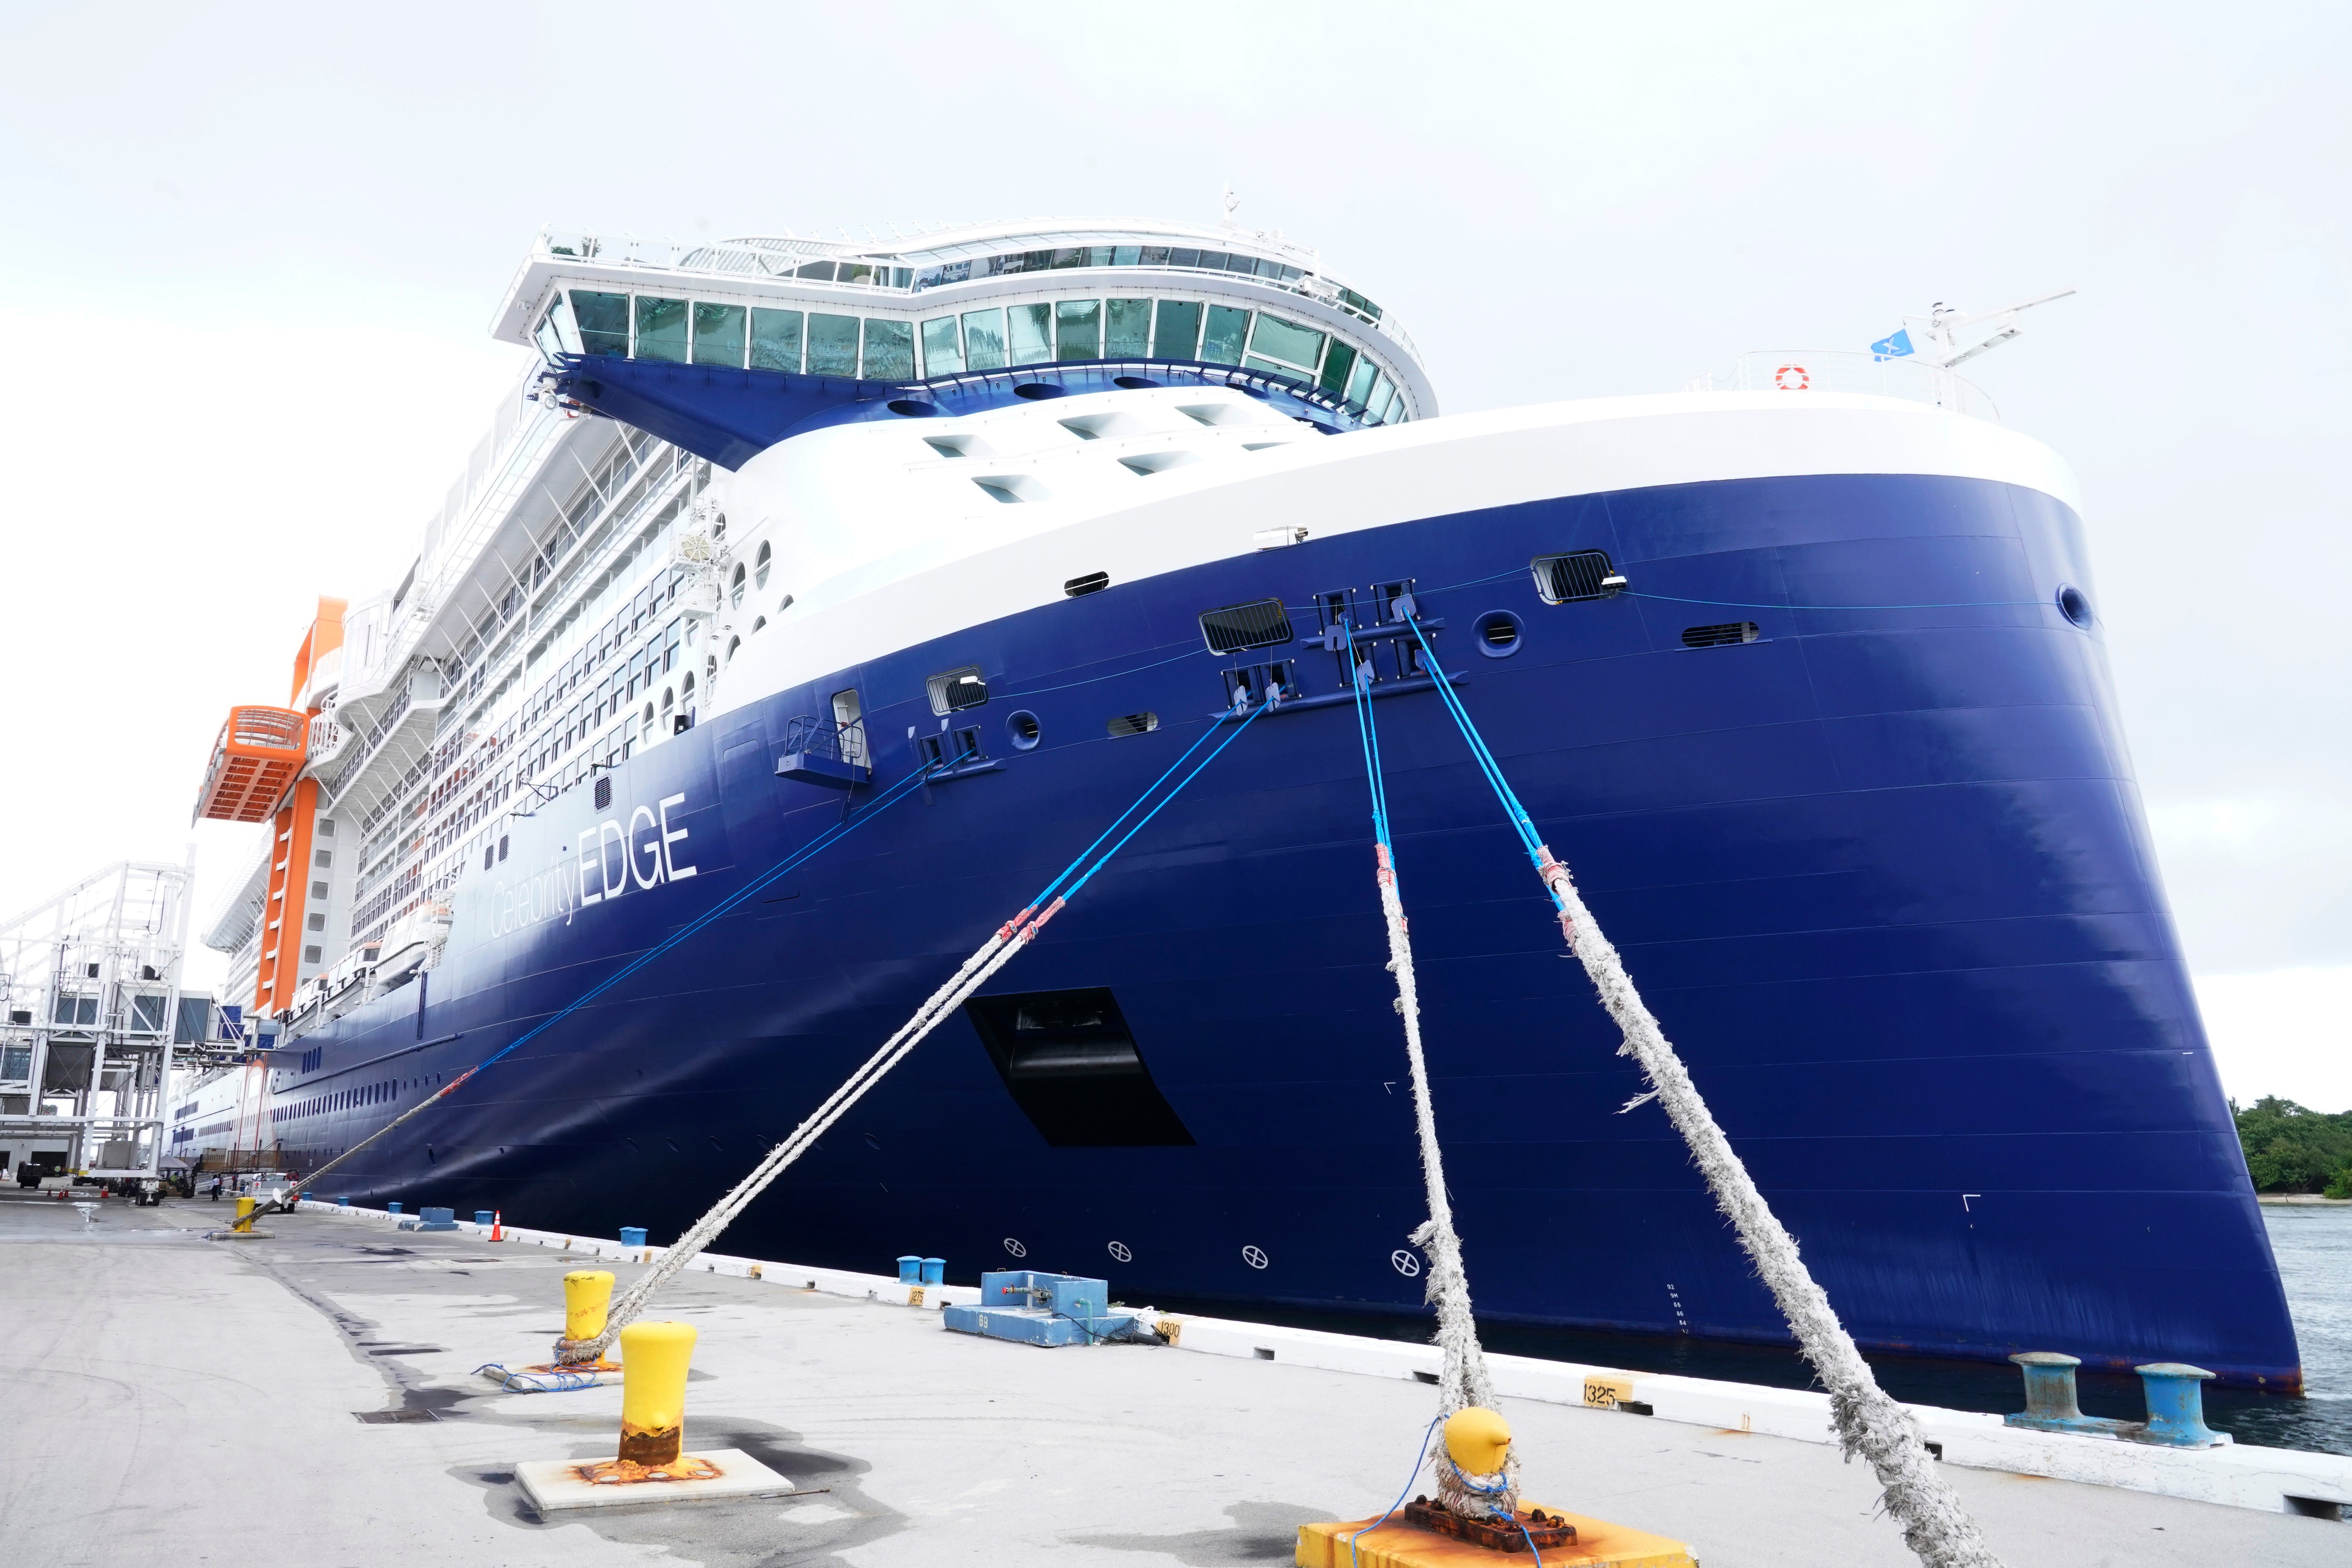 The woman travelled on a 7-day Celebrity Cruises trip in December 2021